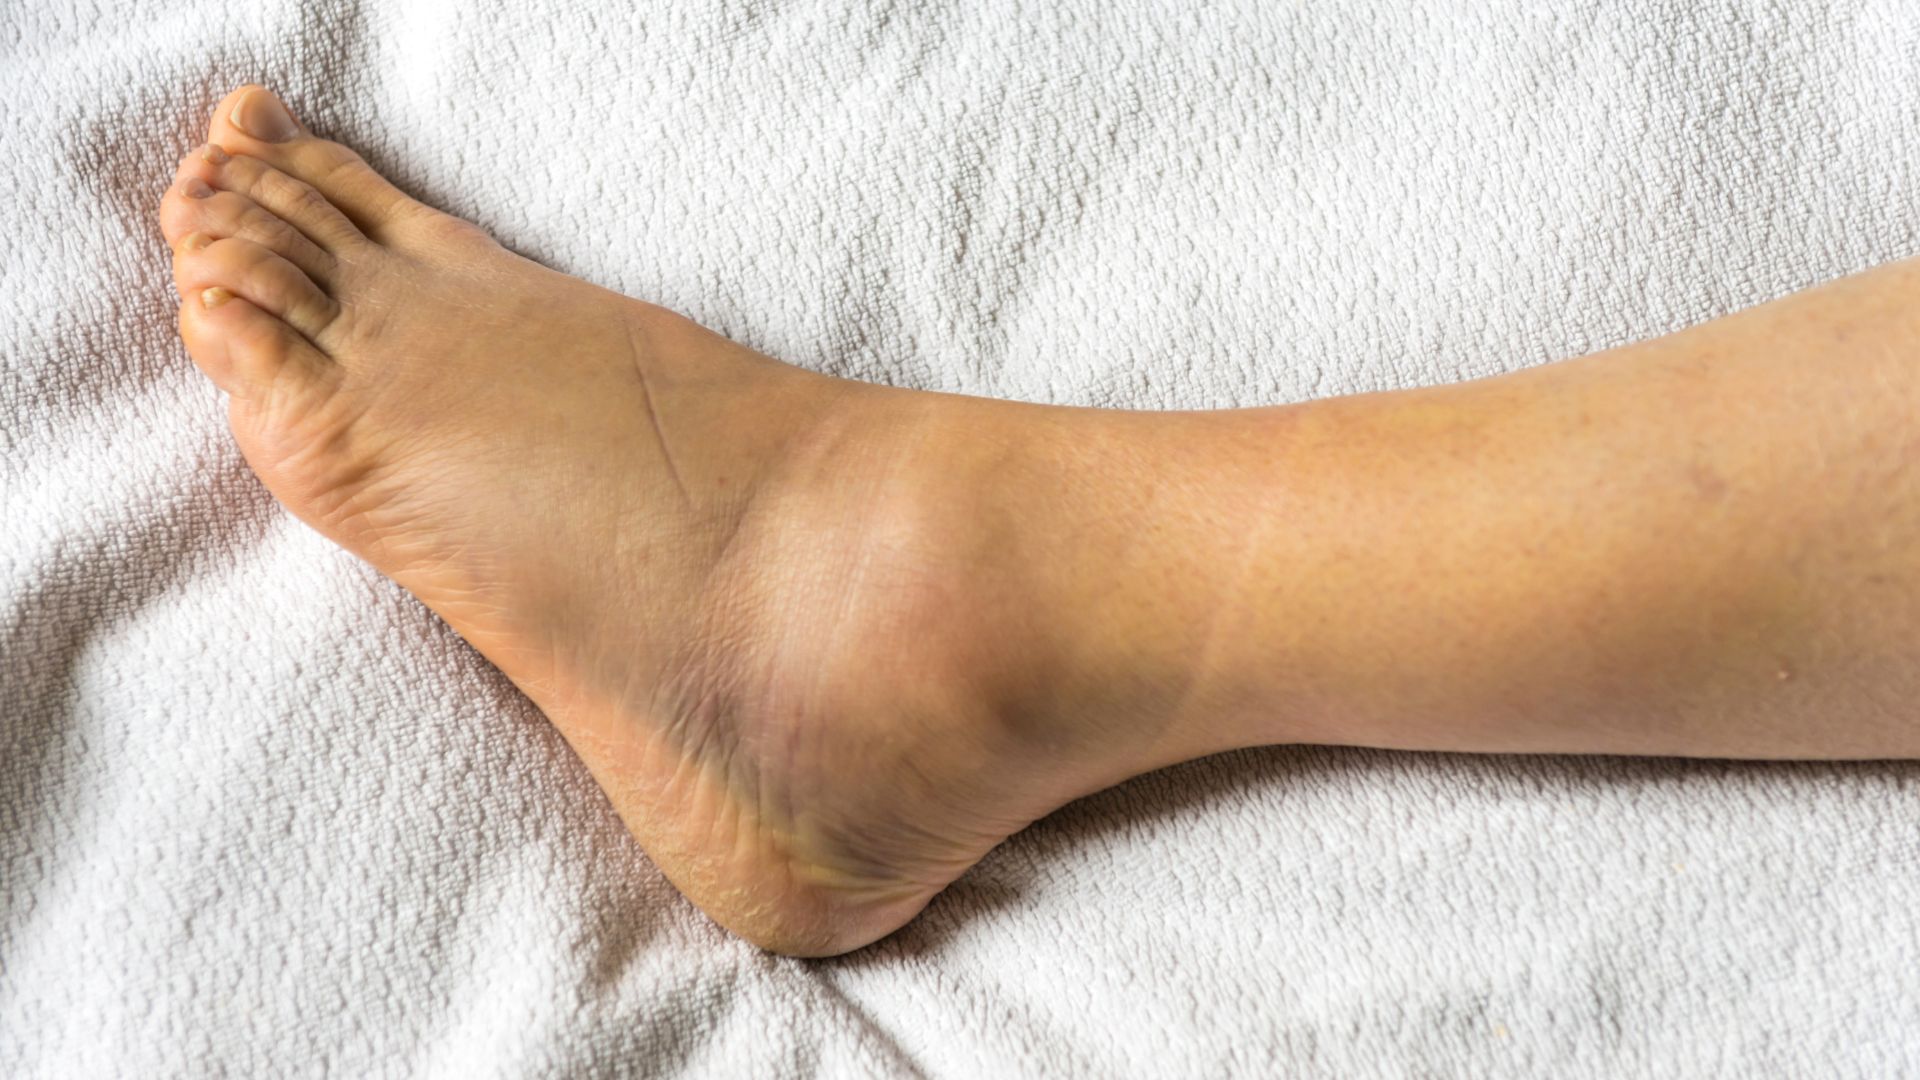 Ankle Sprain Rehab - Tips for Prevention and Recovery